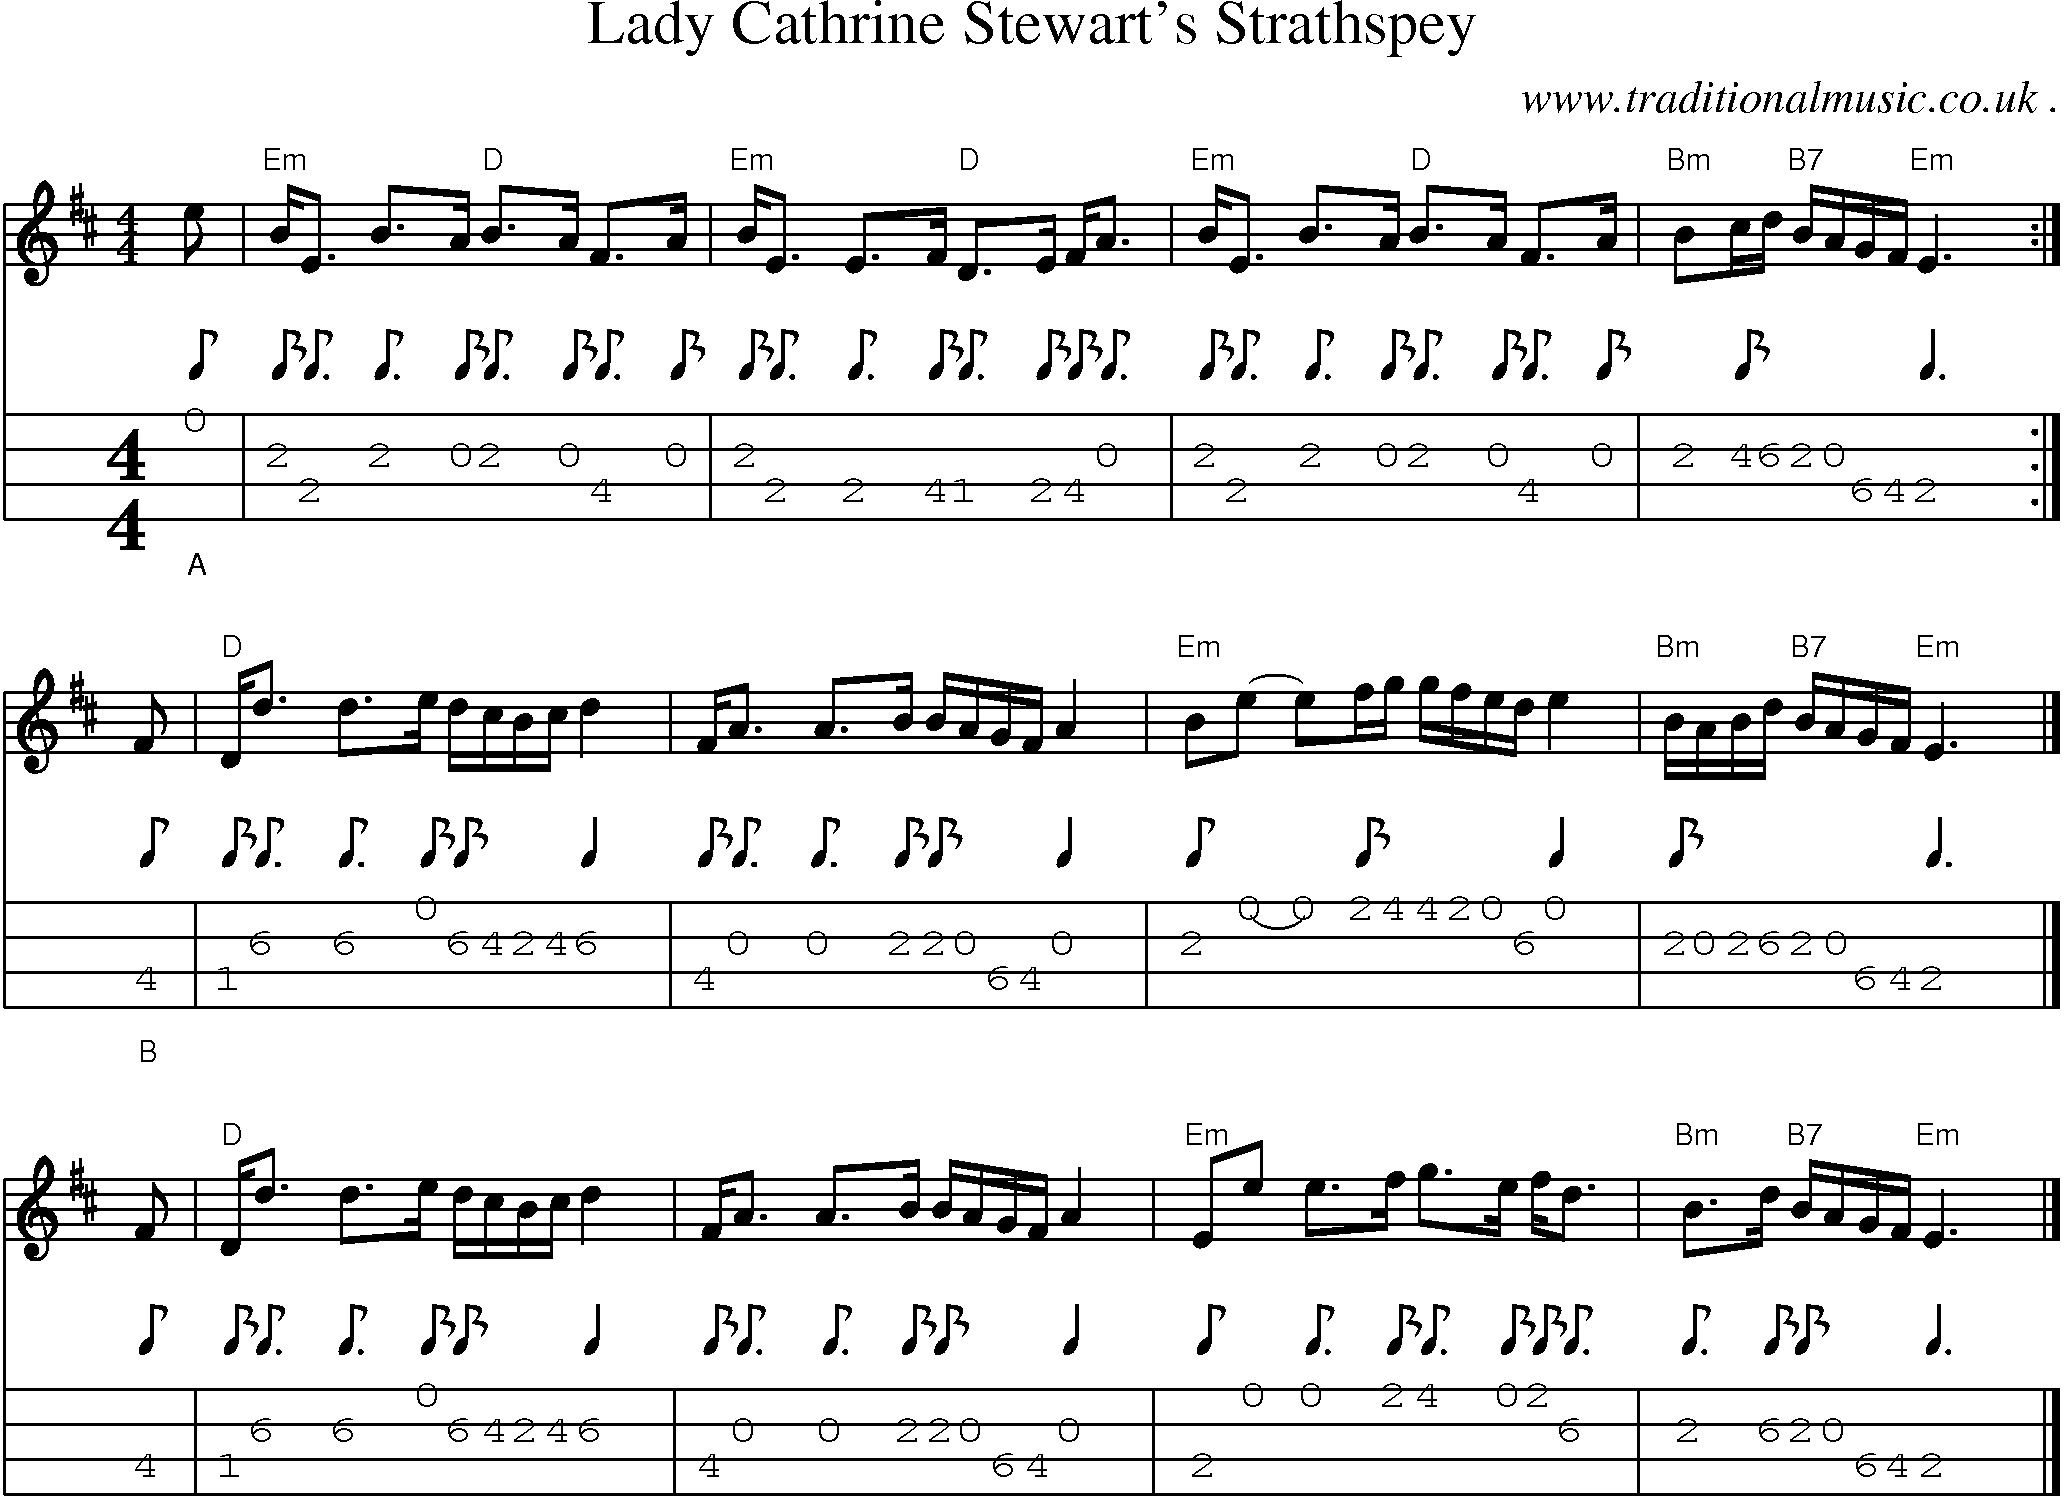 Sheet-music  score, Chords and Mandolin Tabs for Lady Cathrine Stewarts Strathspey